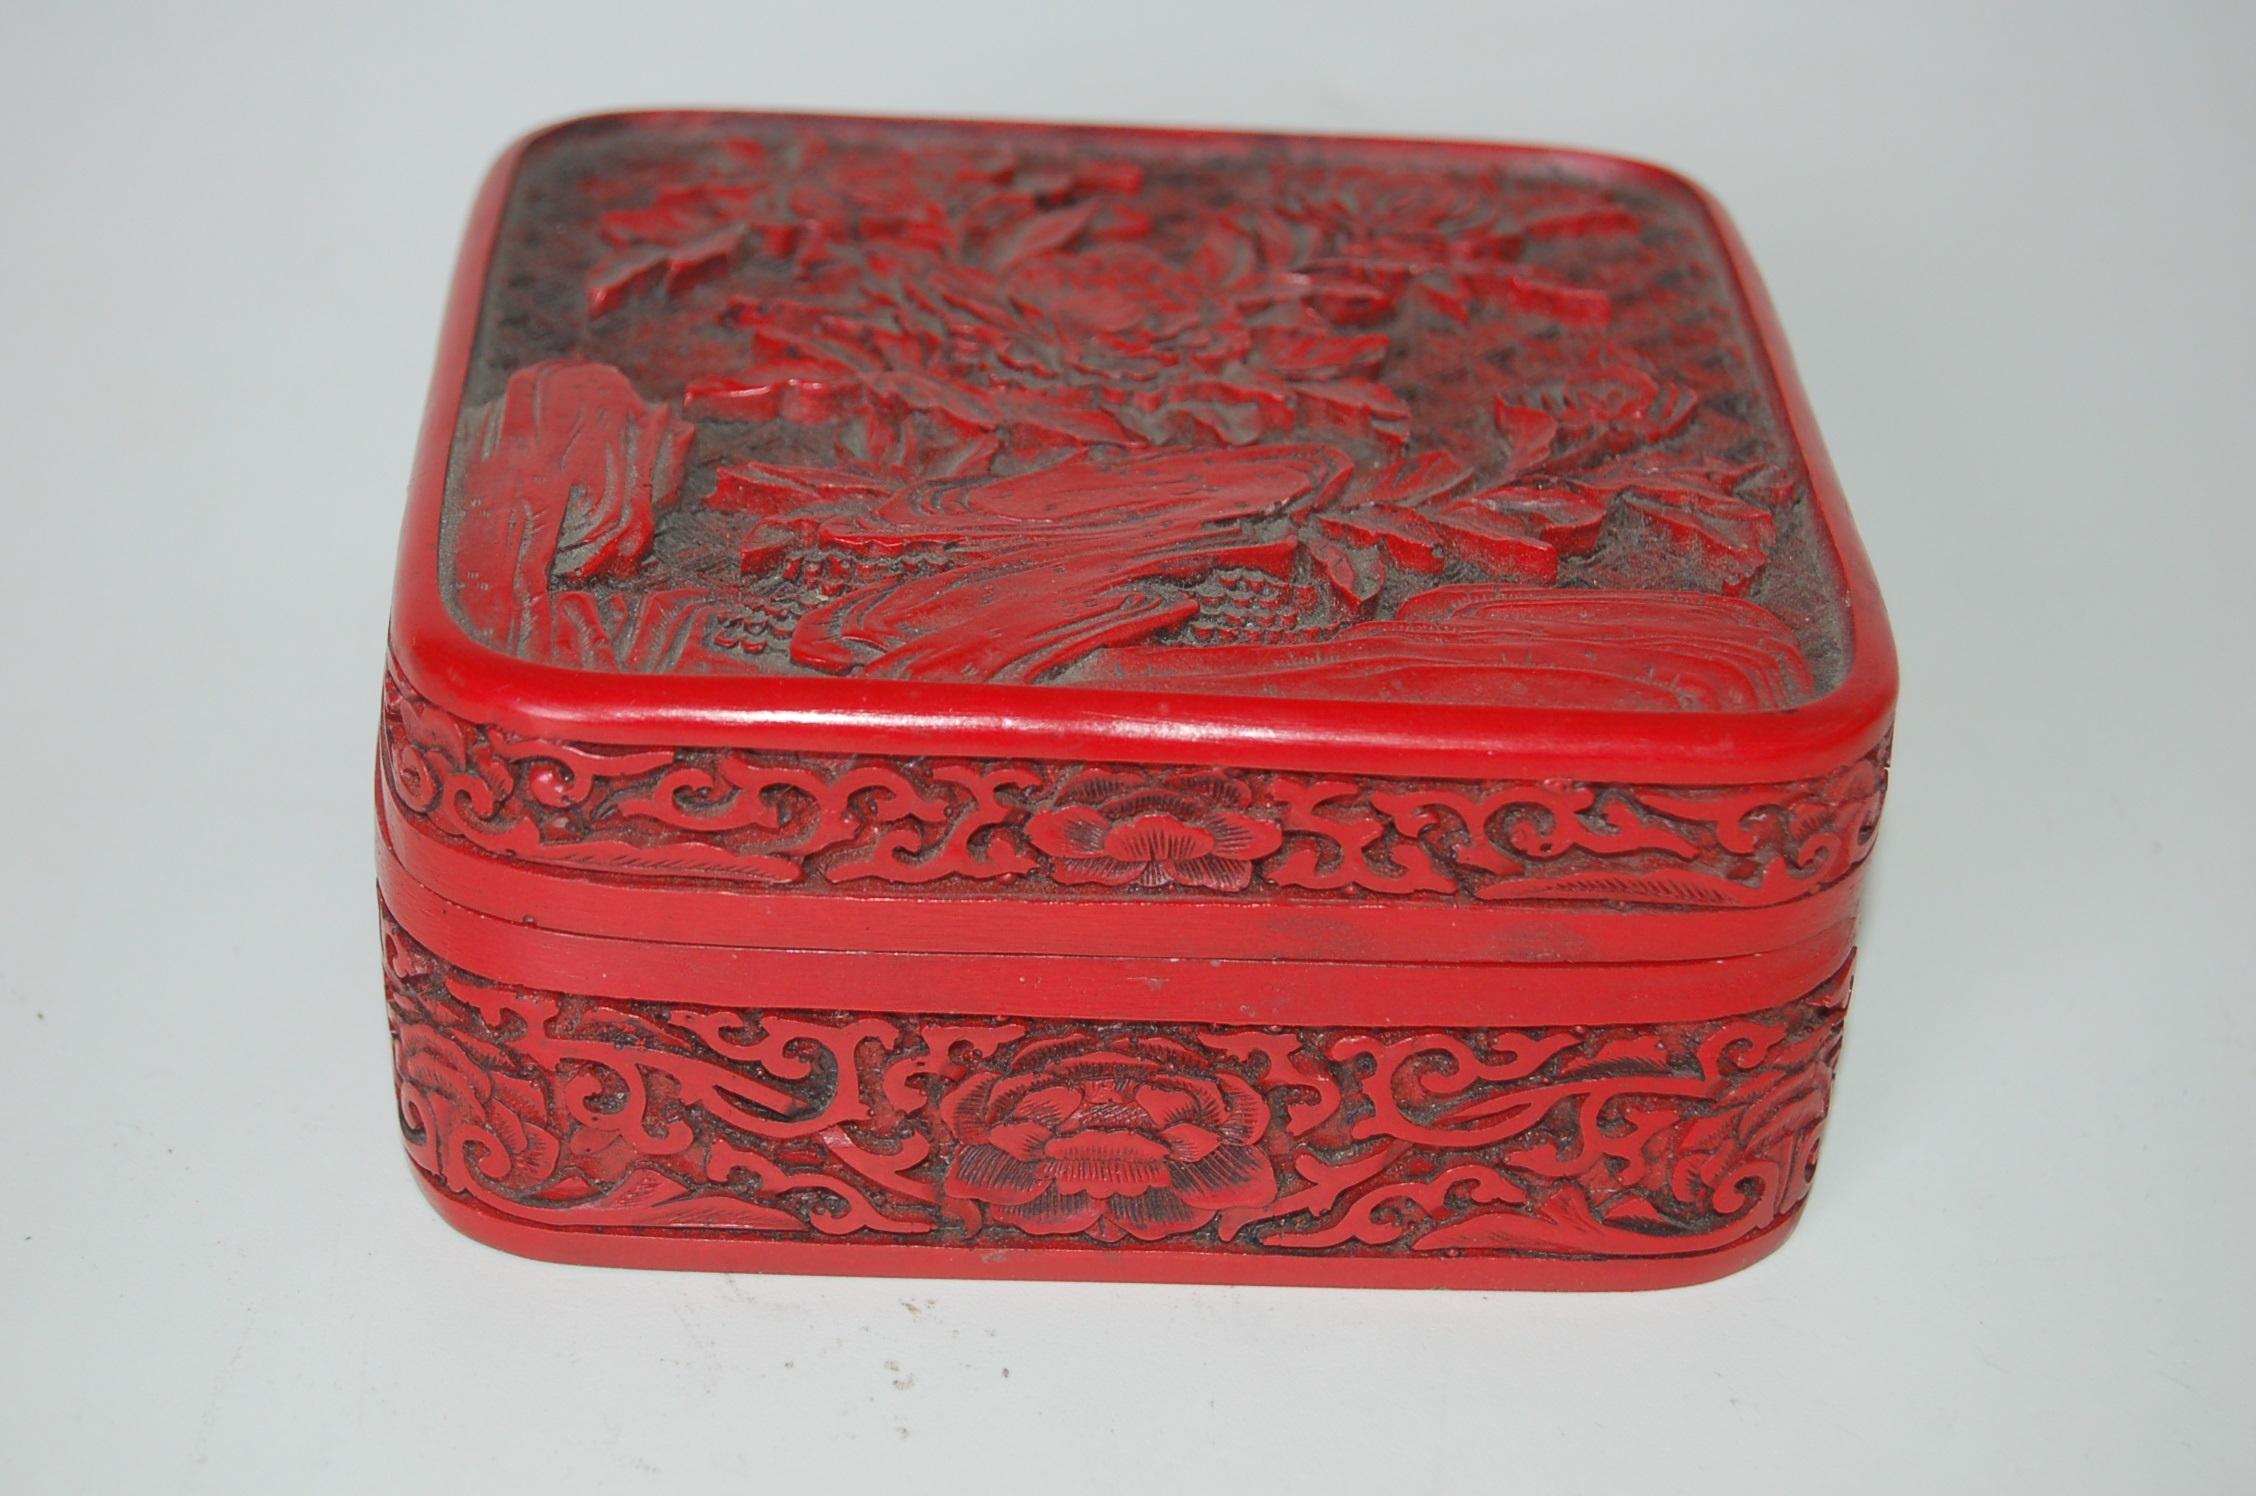 Antique floral hand carved lacquer cinnabar lidded jewelry box.